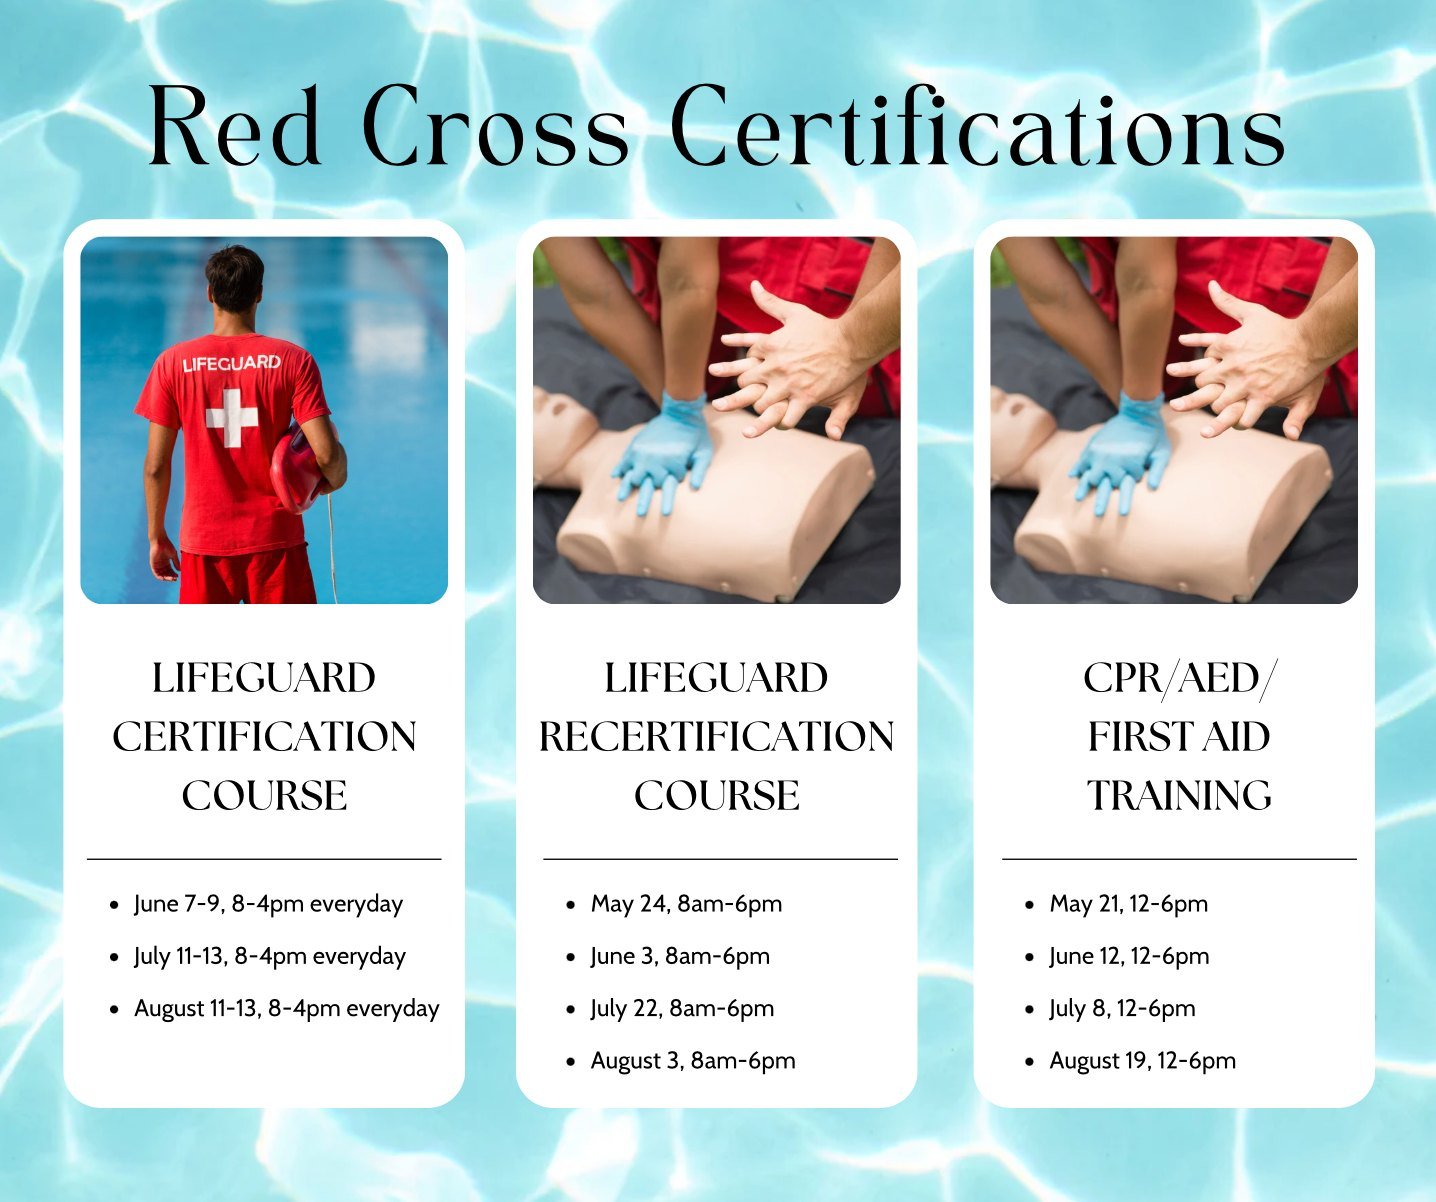 🚨Keep your Summer safe! Take a look at our upcoming Rec Cross Certifications. Learn more and register: islandreccenter.org/red-cross-certifications